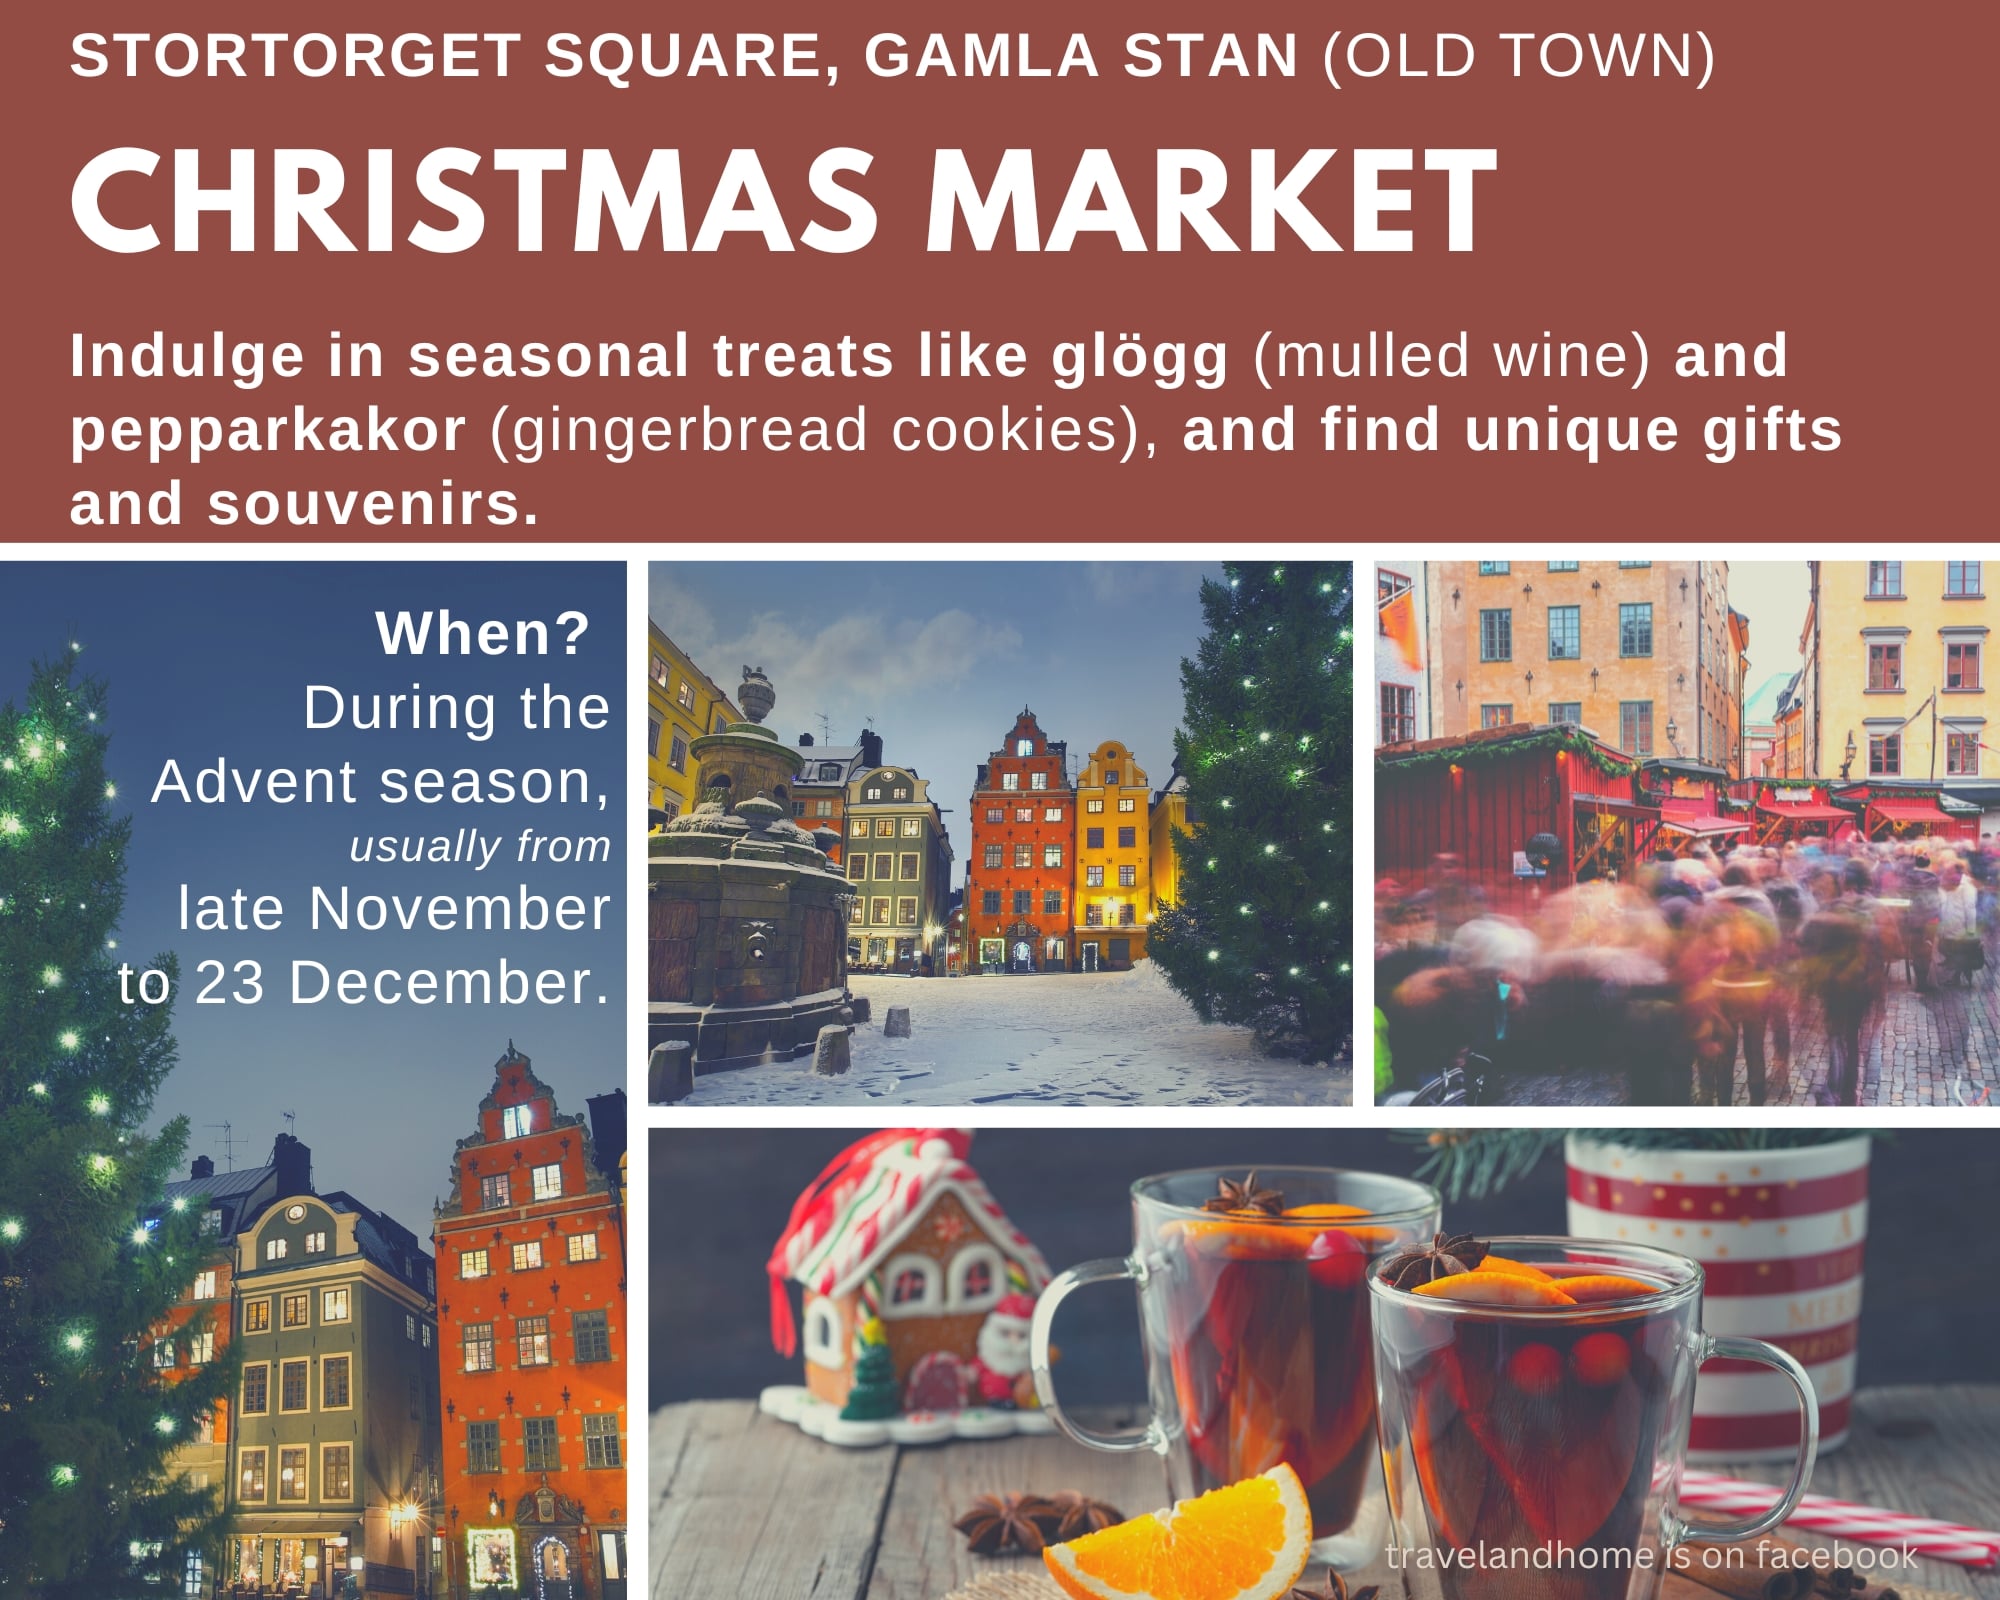 Stockholm best time to go on holiday, winter, christmas market on stortorget square, gamla stan, old town min